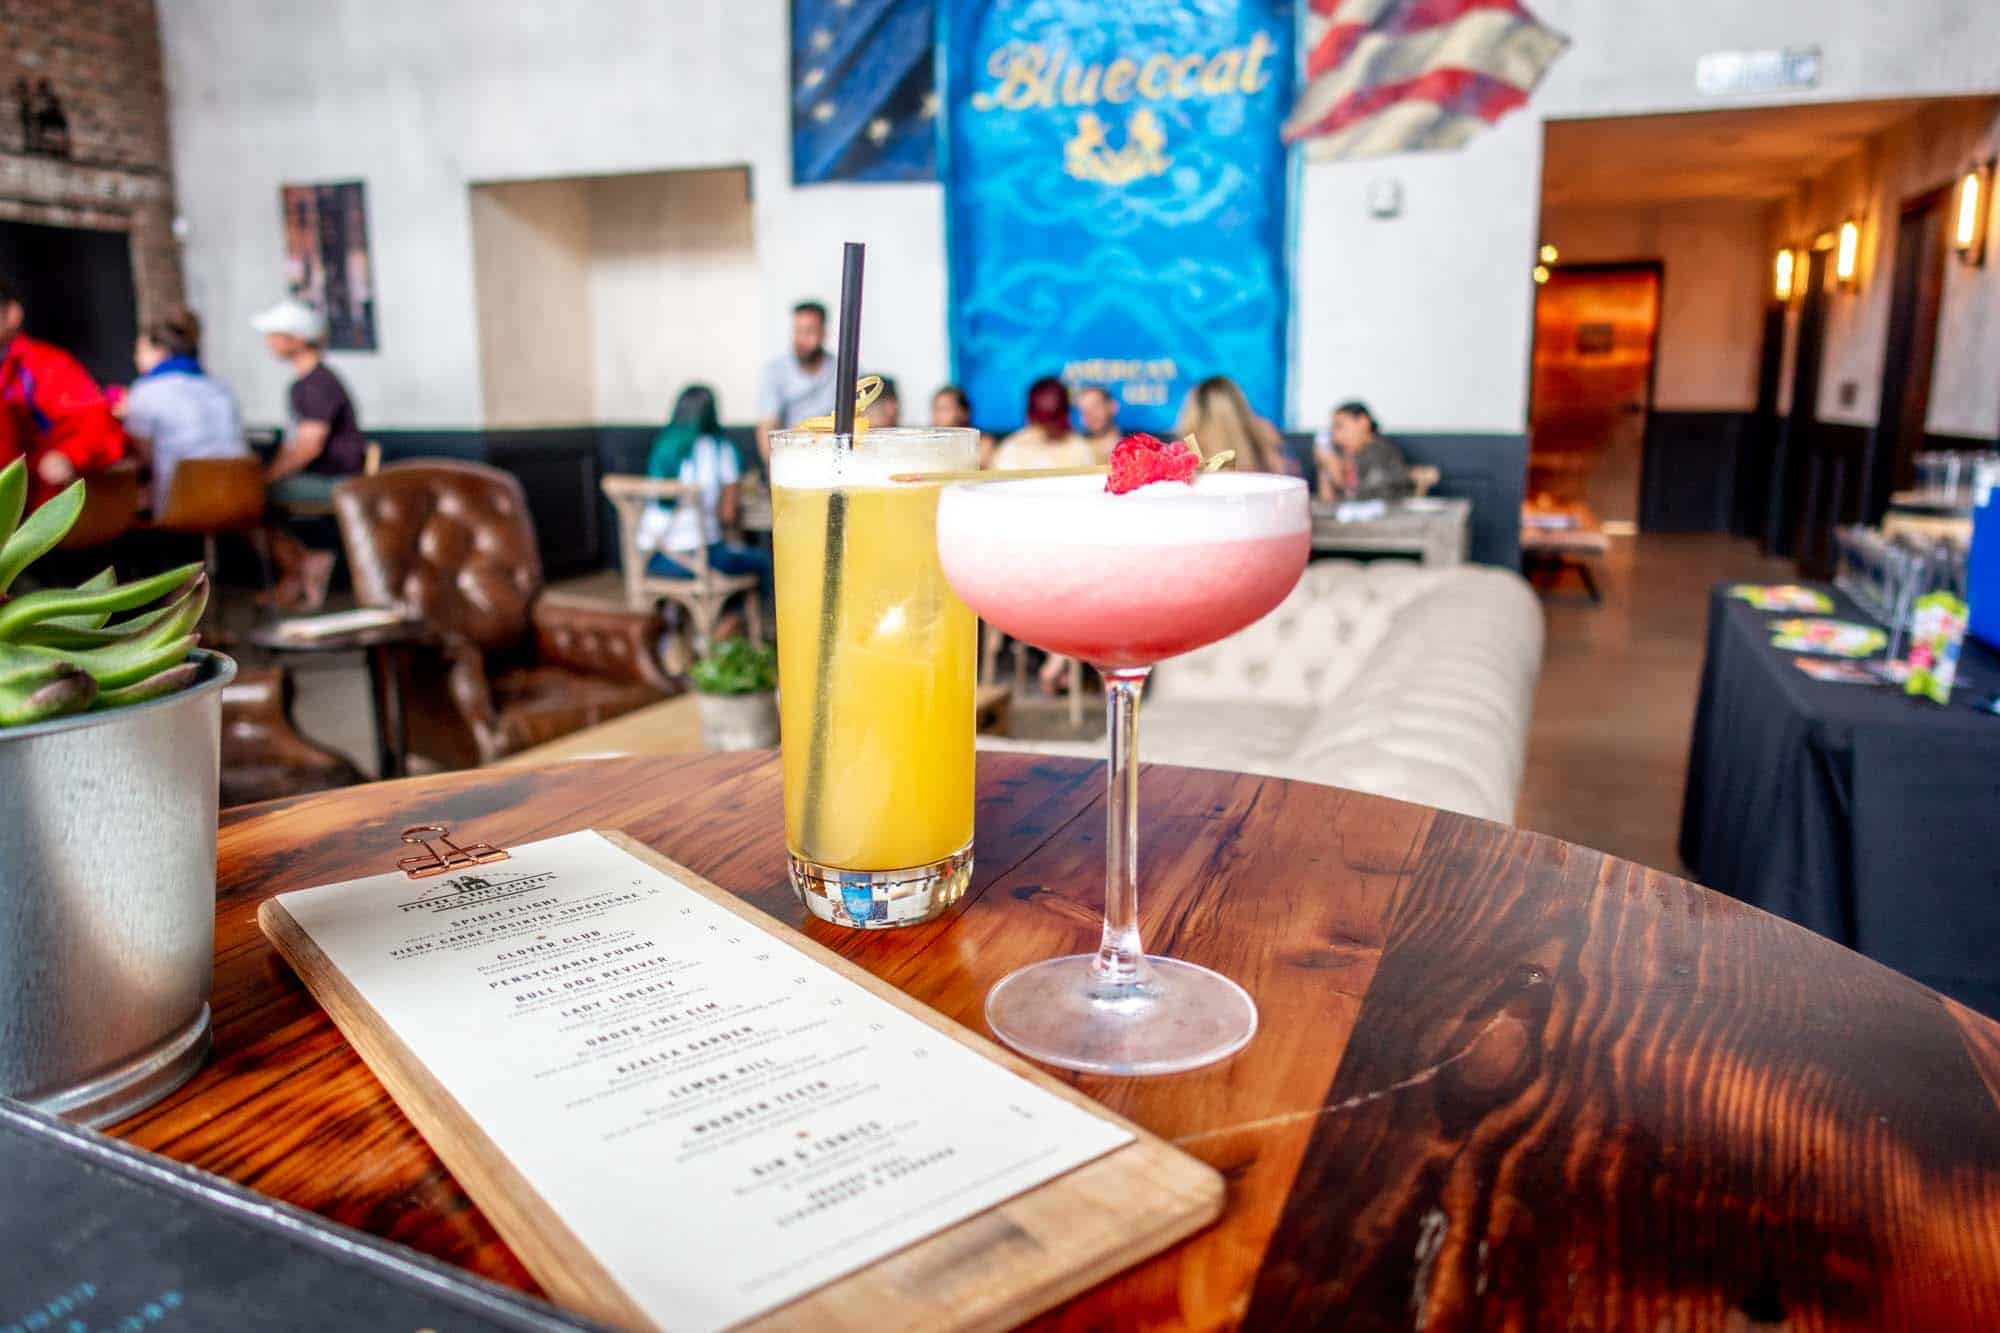 Two cocktails and a menu on a table in front of a mural showing a bottle of Bluecoat gin.